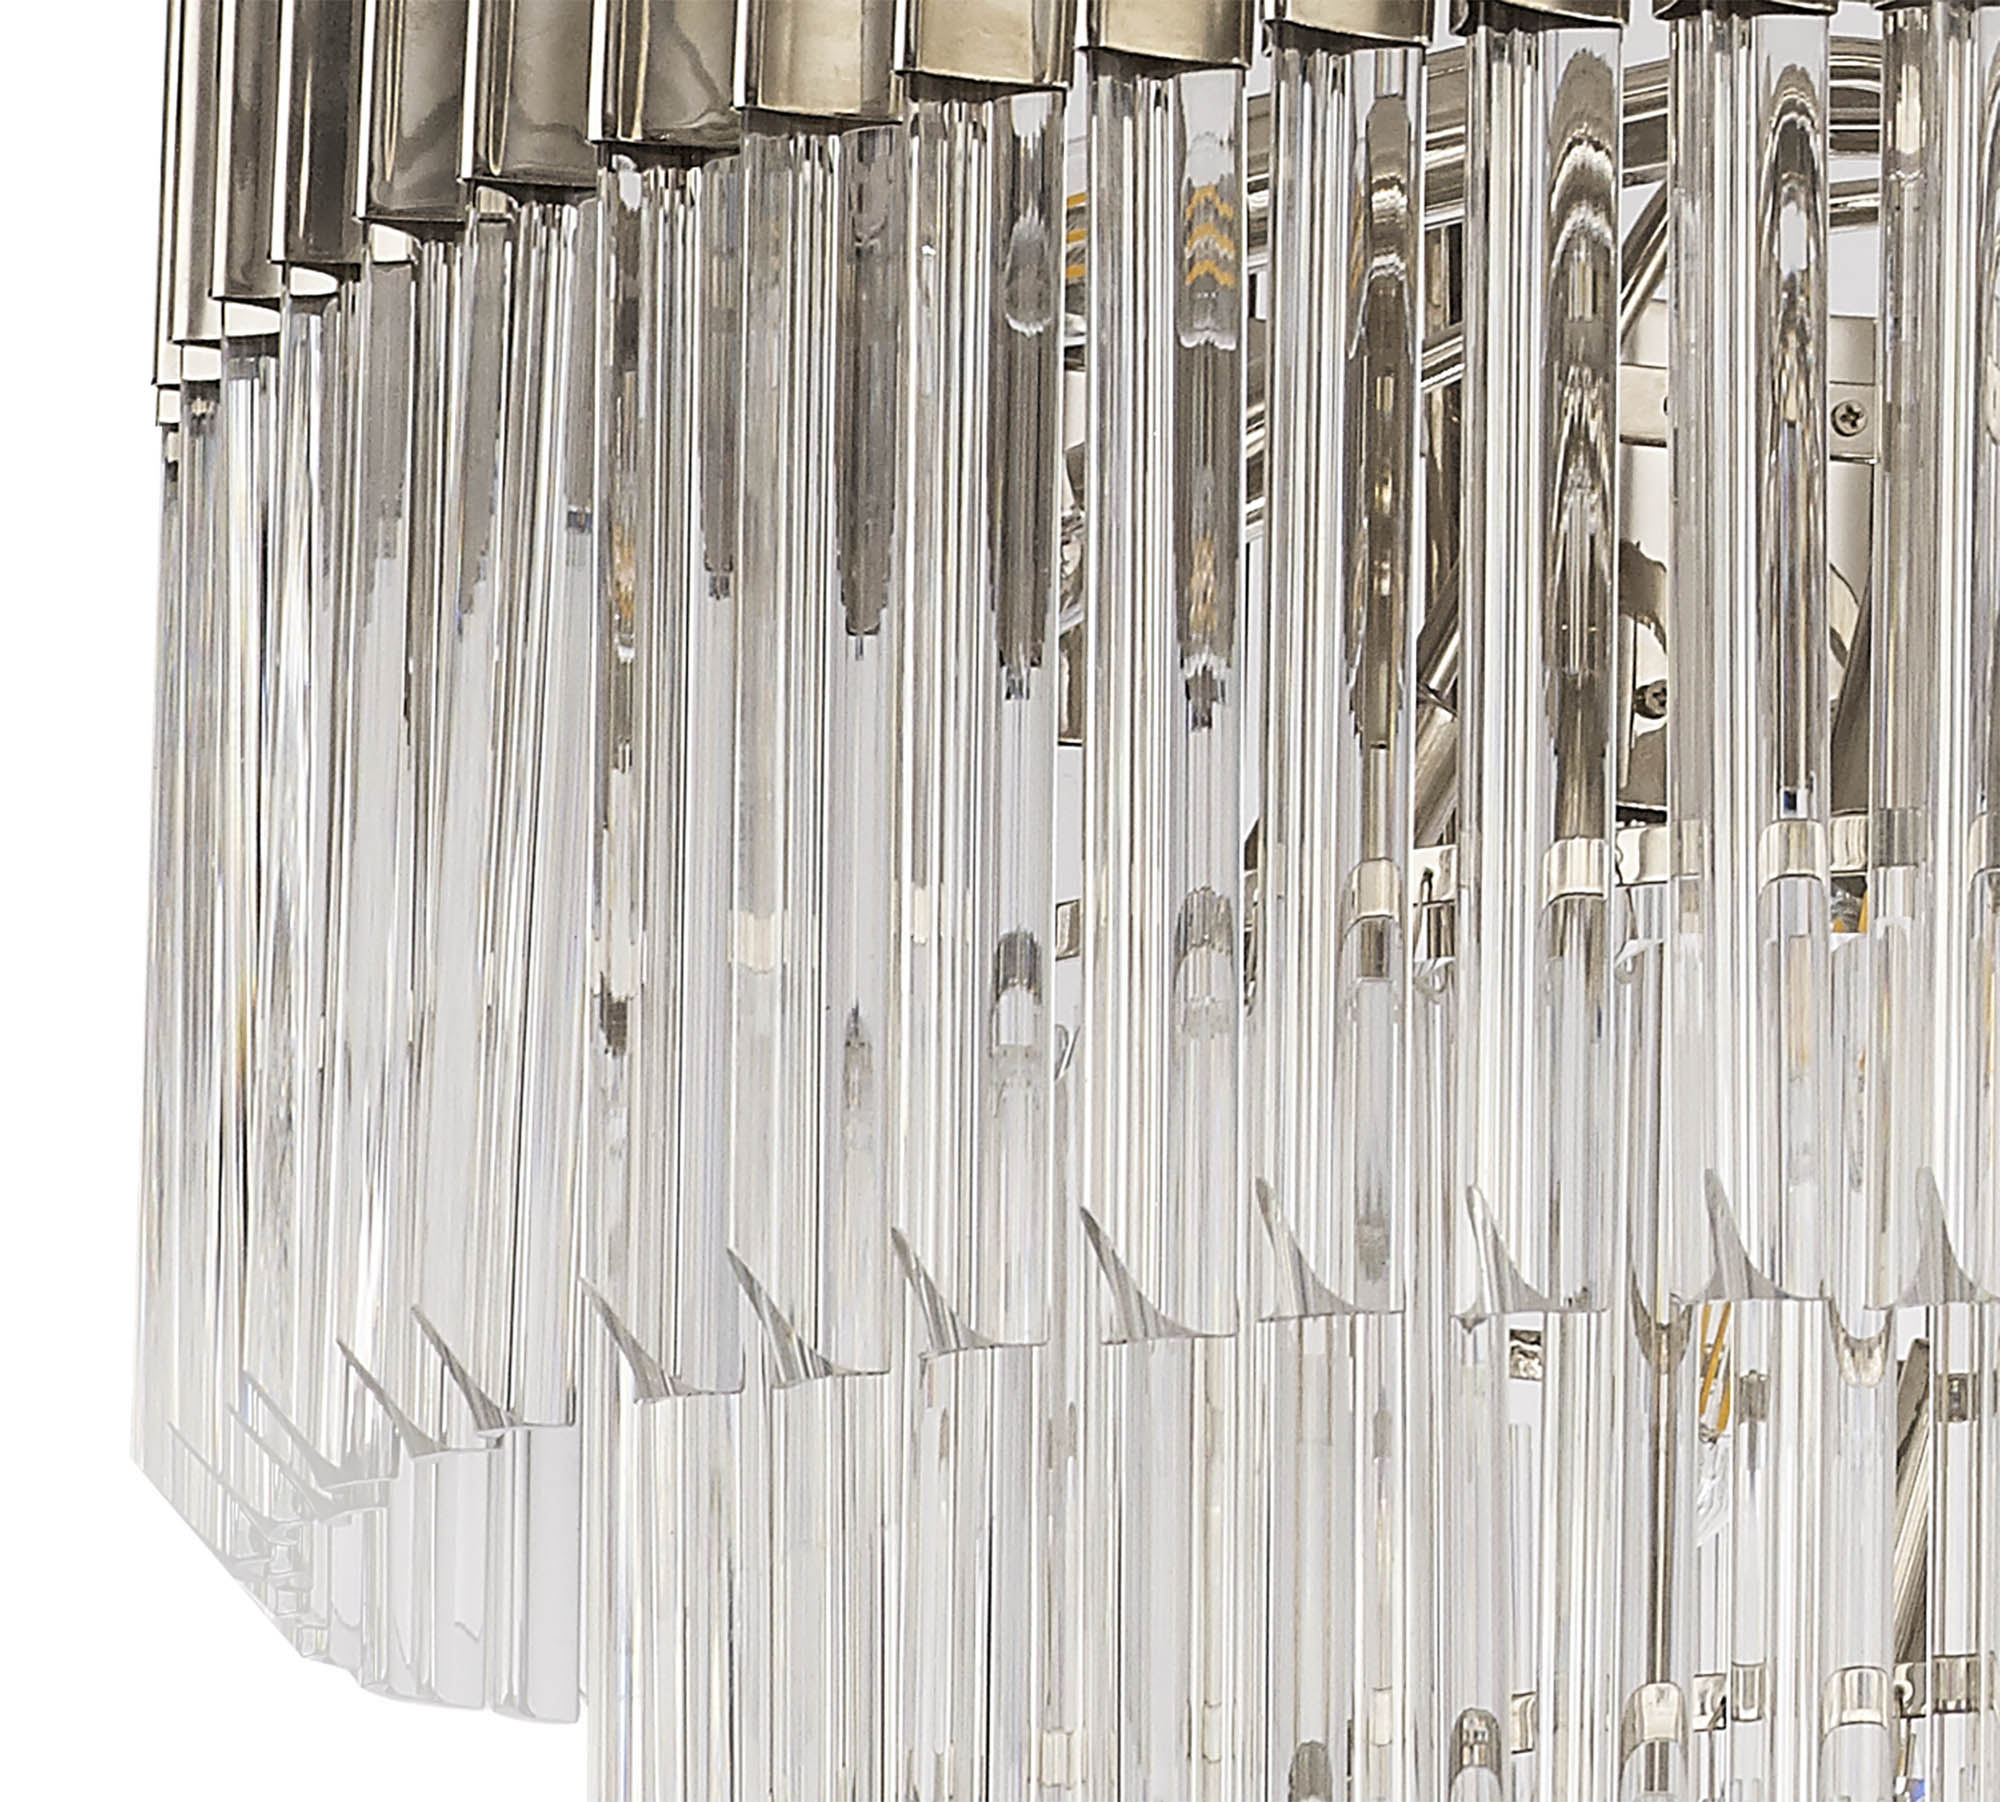 Knightsbridge Pendant Round 5 Tier 18 Light E14, Polished Nickel/Clear Glass - LO173723. Item Weight: 30.2kg